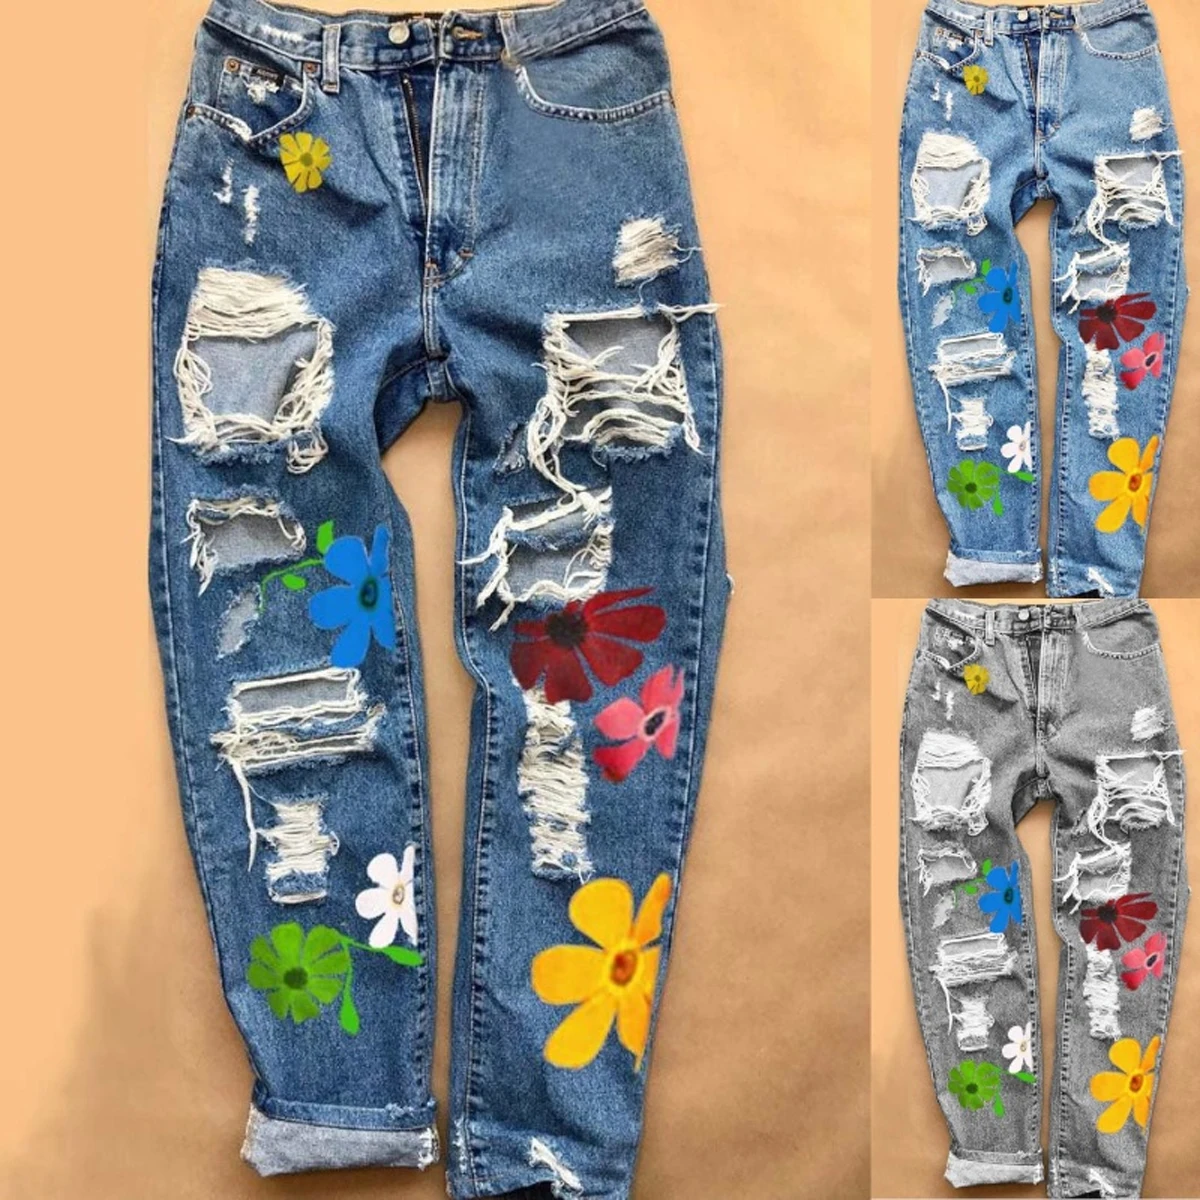 Women Ripped Jeans High Waist Floral Print Trousers with Pockets Casual Style Bottoms